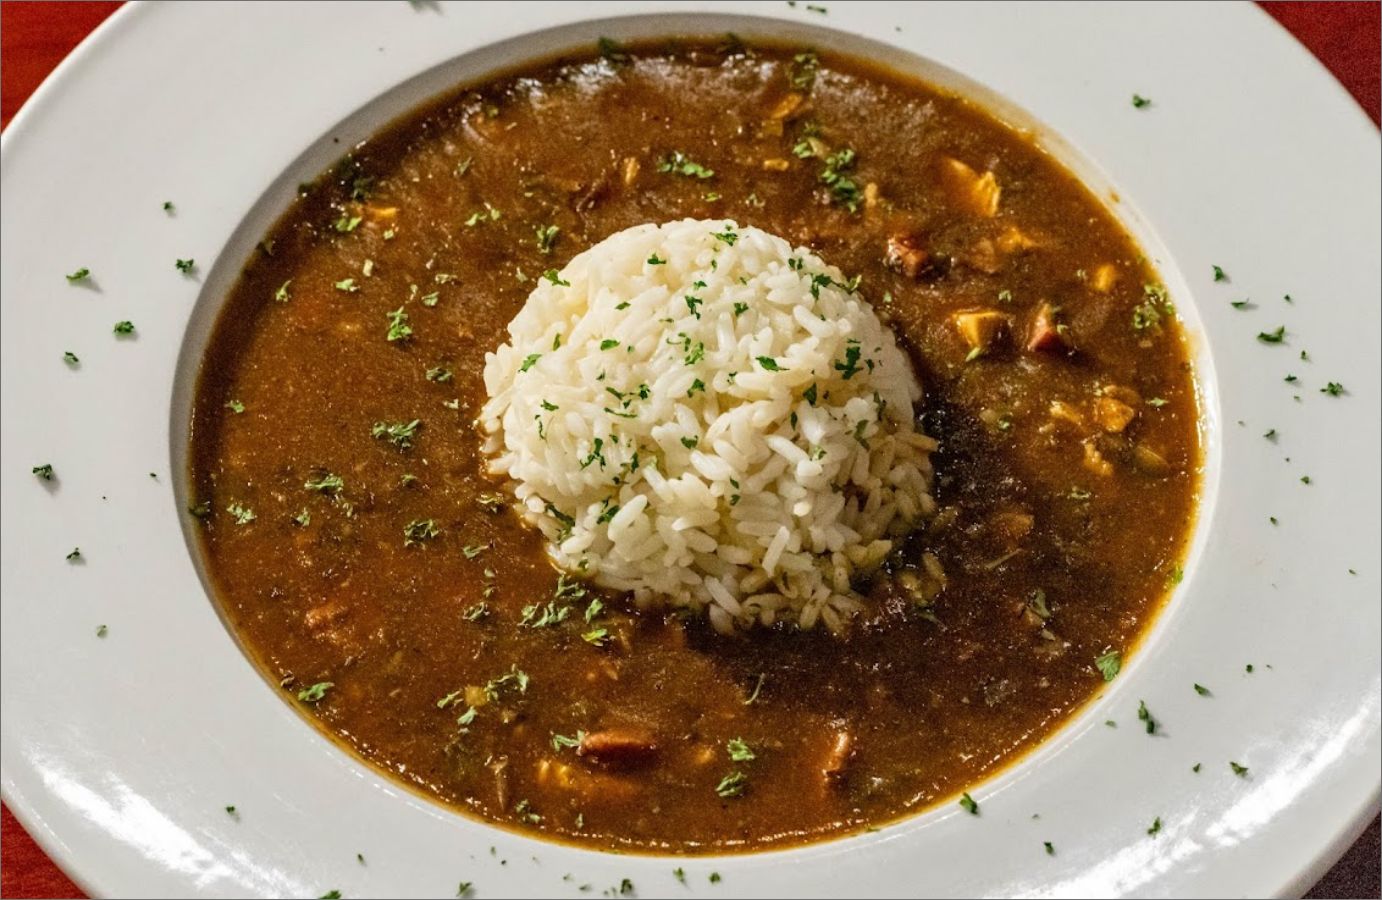 New Orleans Gumbo served on a plate, top view